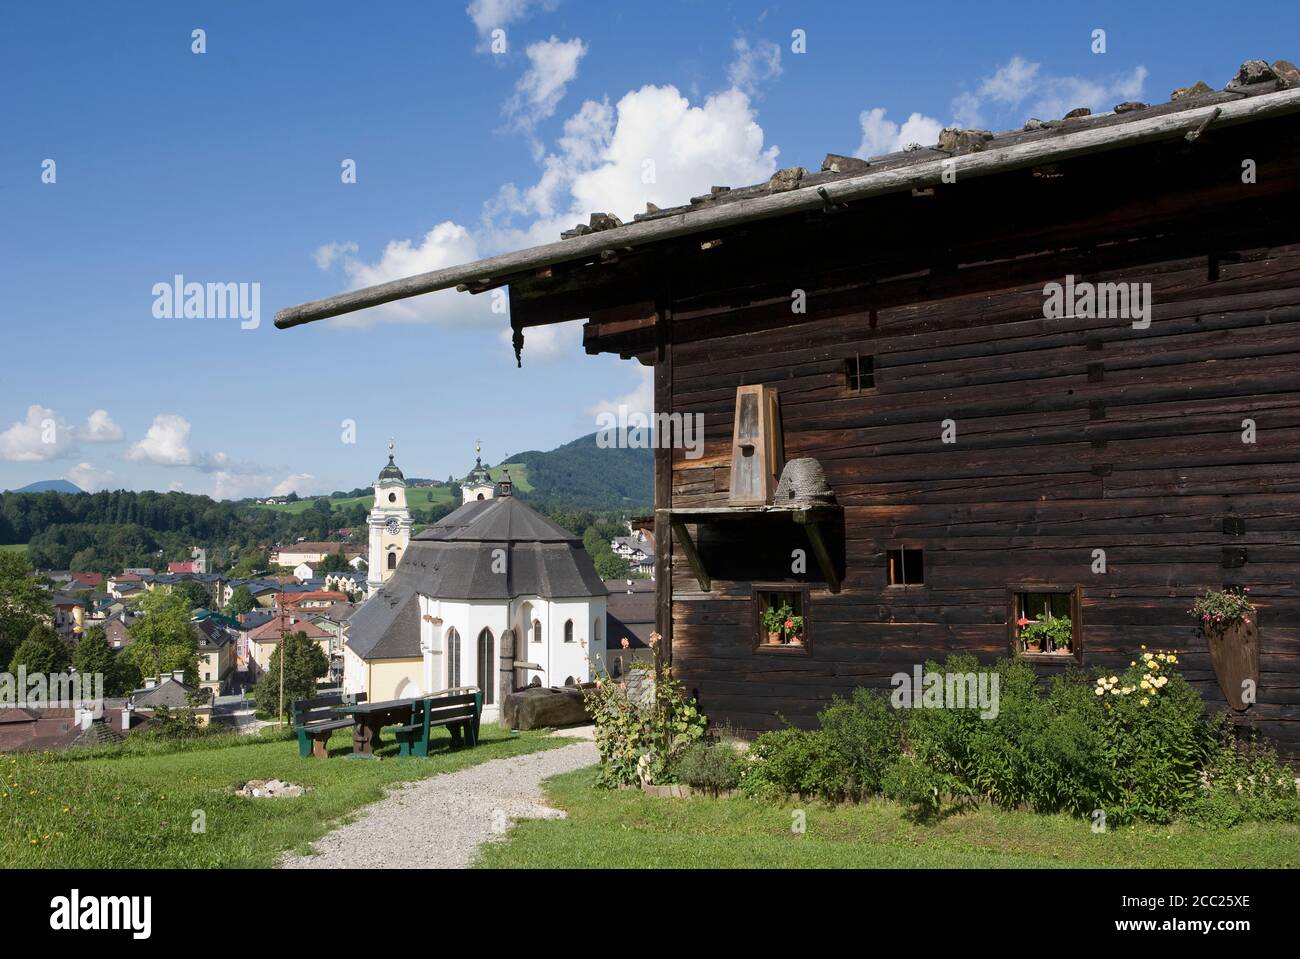 Austria, Mondsee (city), View of house and church in background Stock Photo